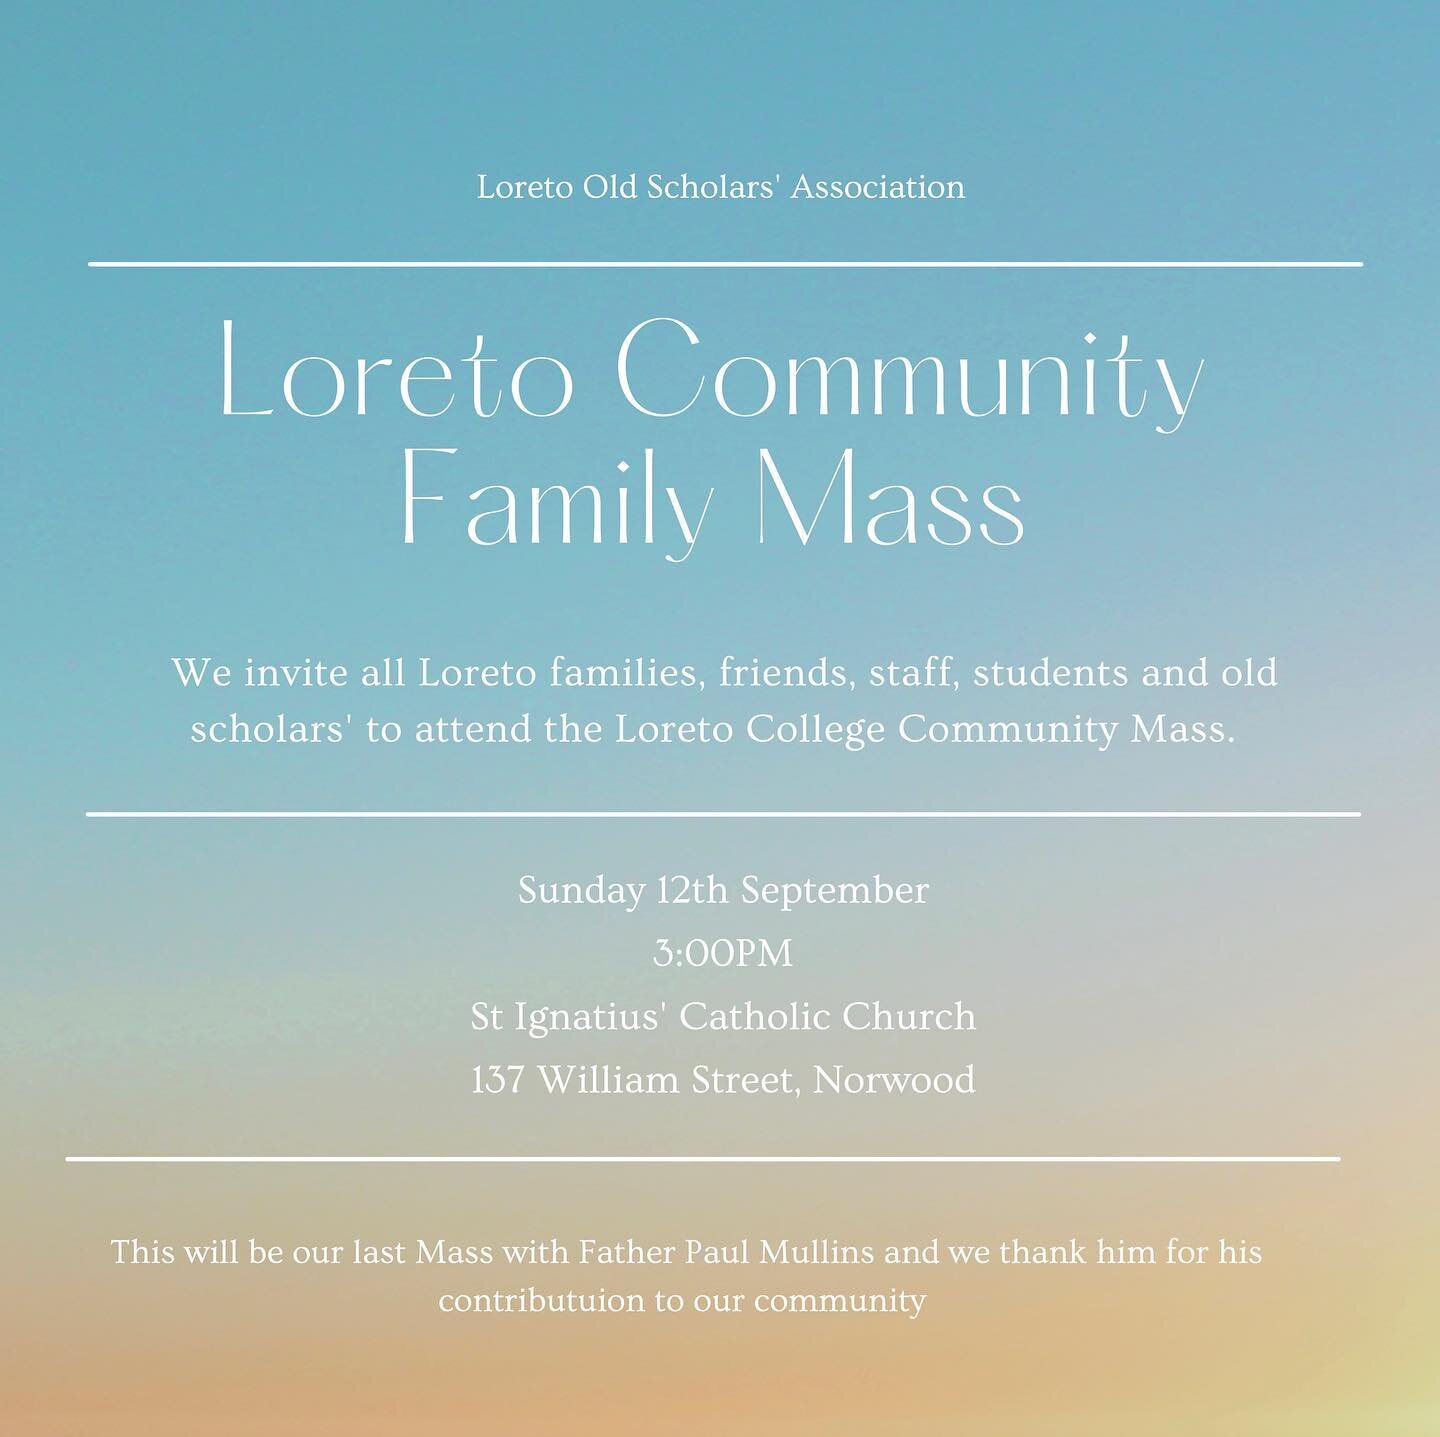 We invite all Loreto families, friends, staff, students and Old Scholars&rsquo; to attend the Loreto Community Family Mass - This Sunday at St Ignatius Church Norwood, 3pm - A chance to thank Father Paul Mullins for his contribution to our community